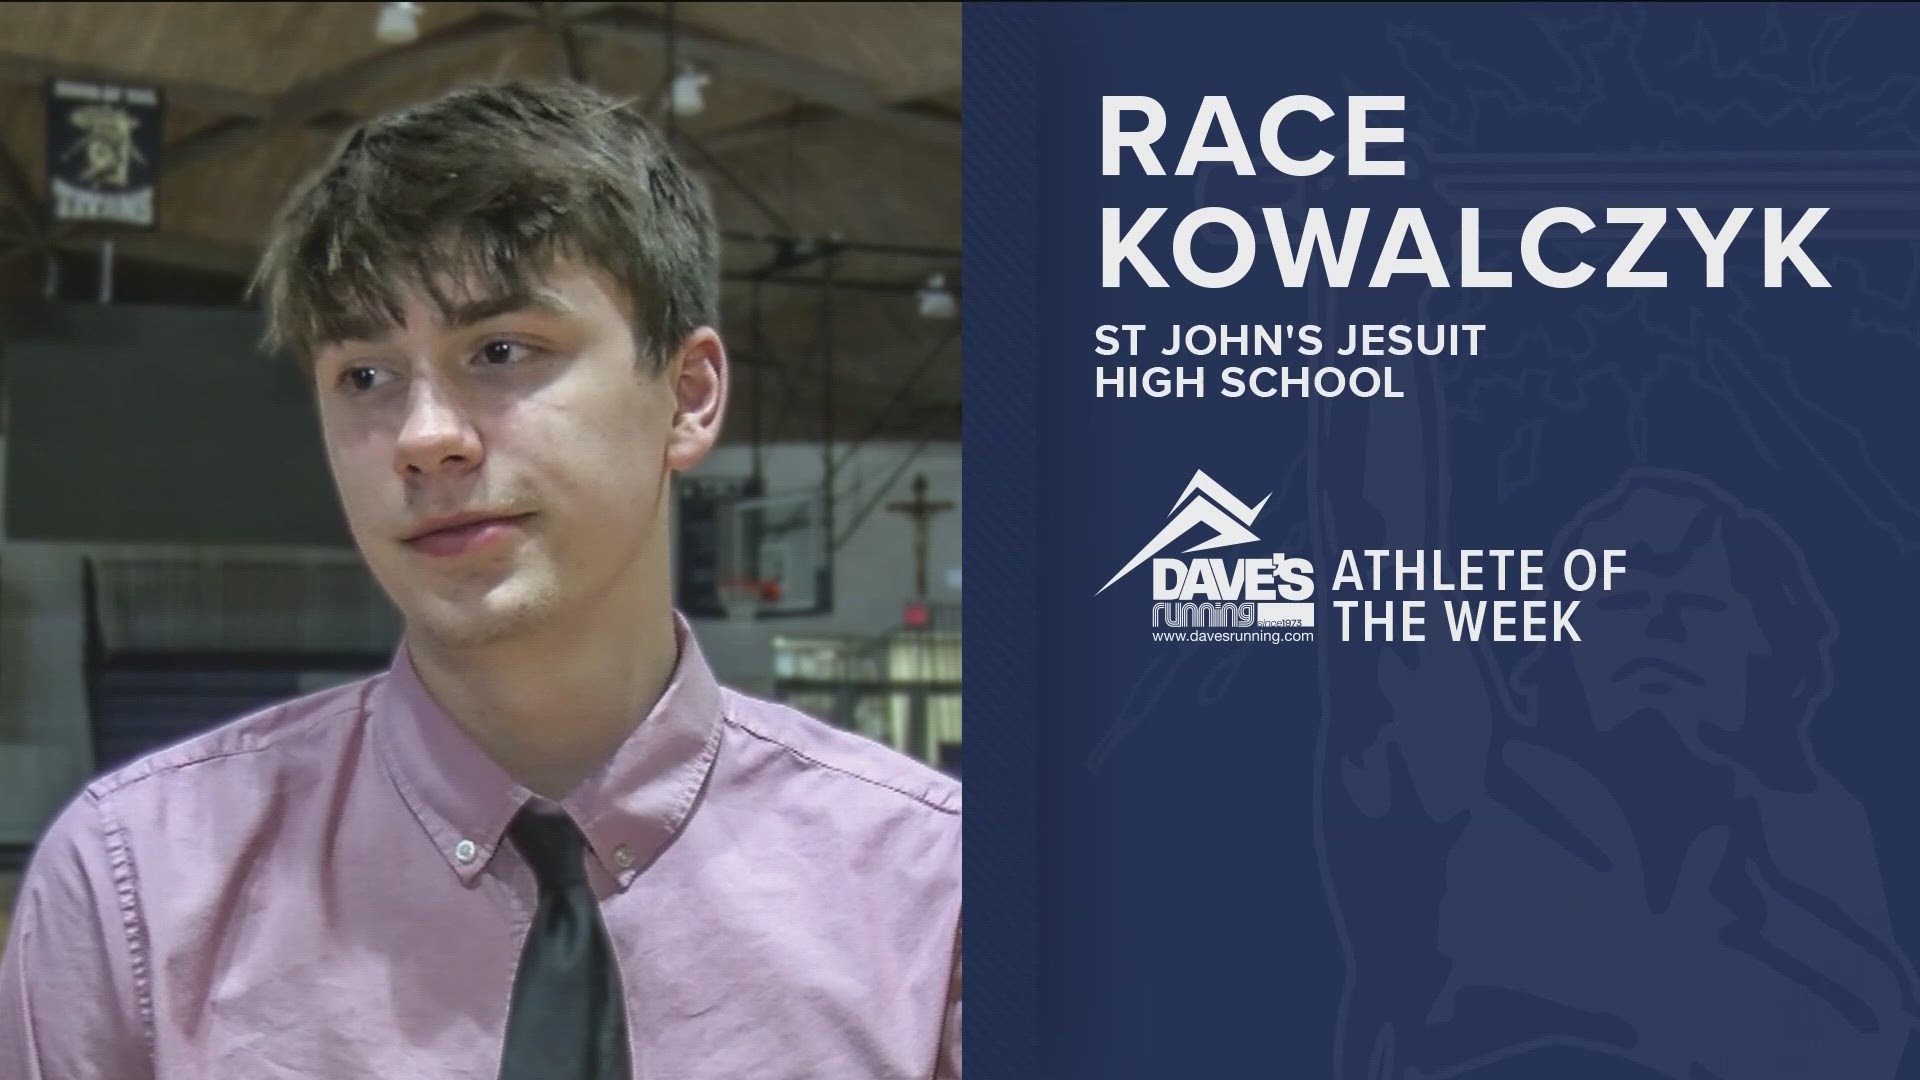 Race Kowalczyk is in his second year on the St. John's basketball team and has already made his mark.